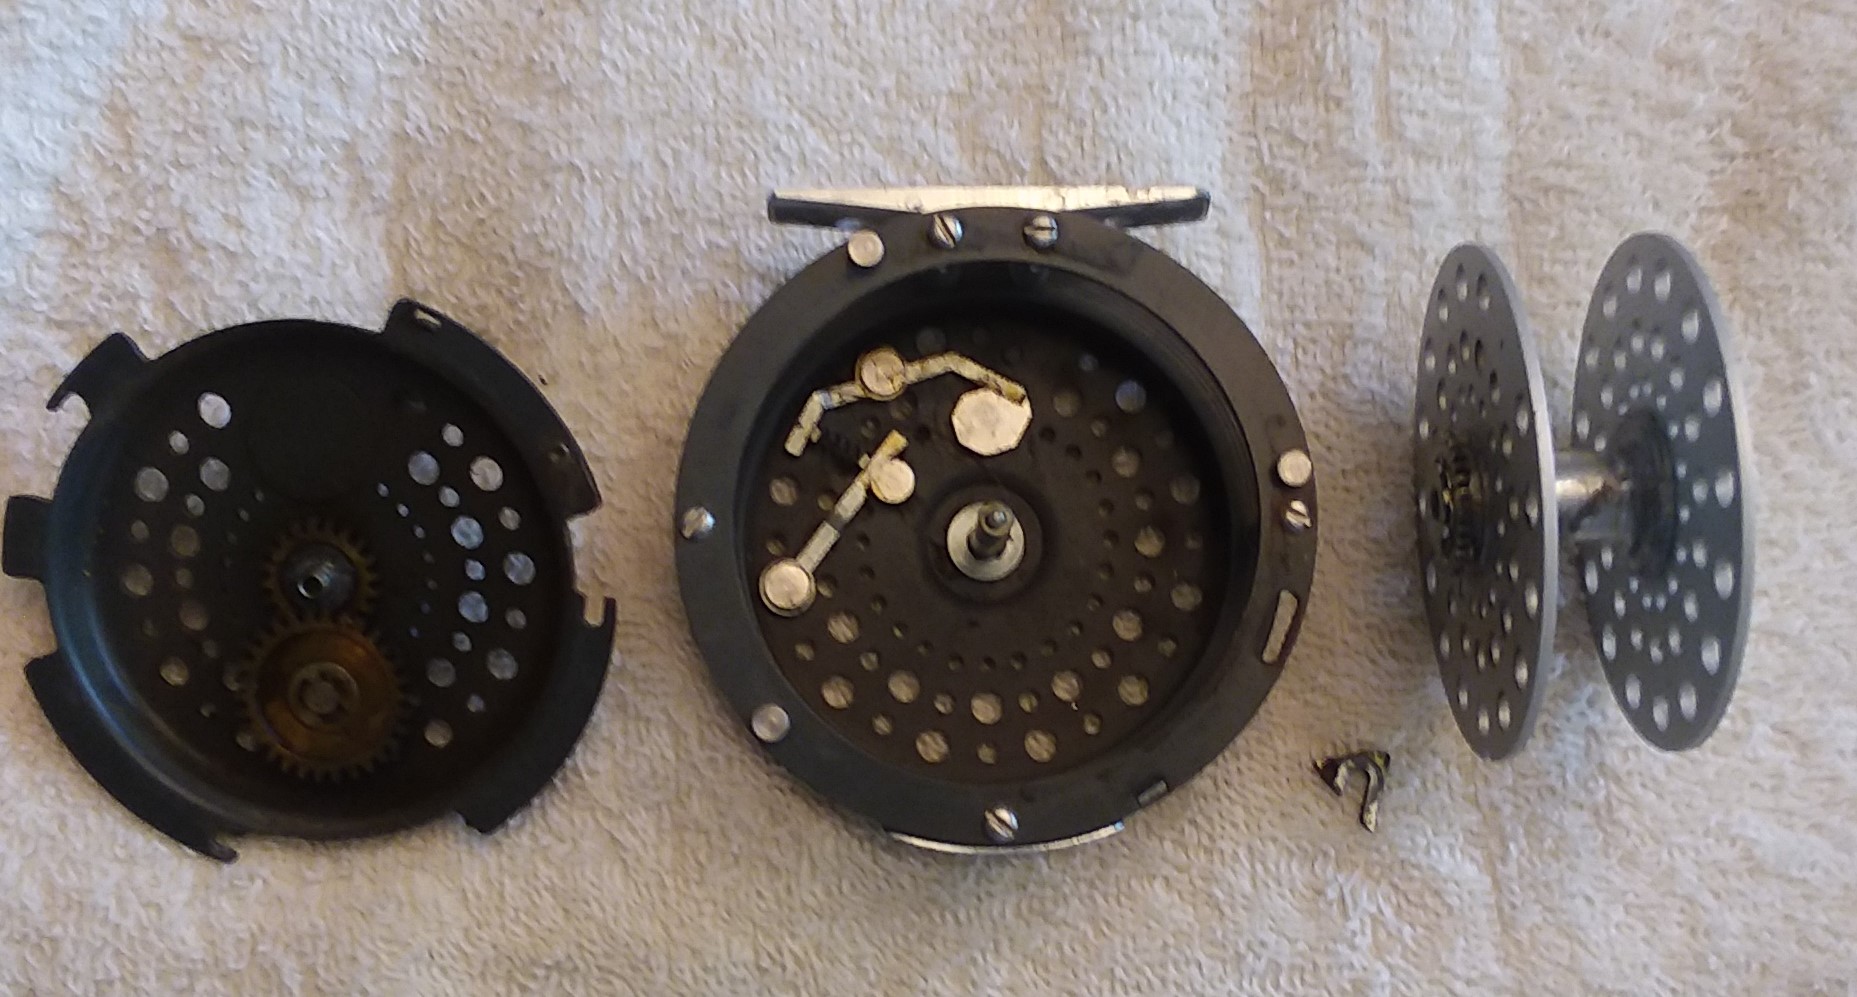 Pawl Spring on Martin MG 10, Classic Fly Reels